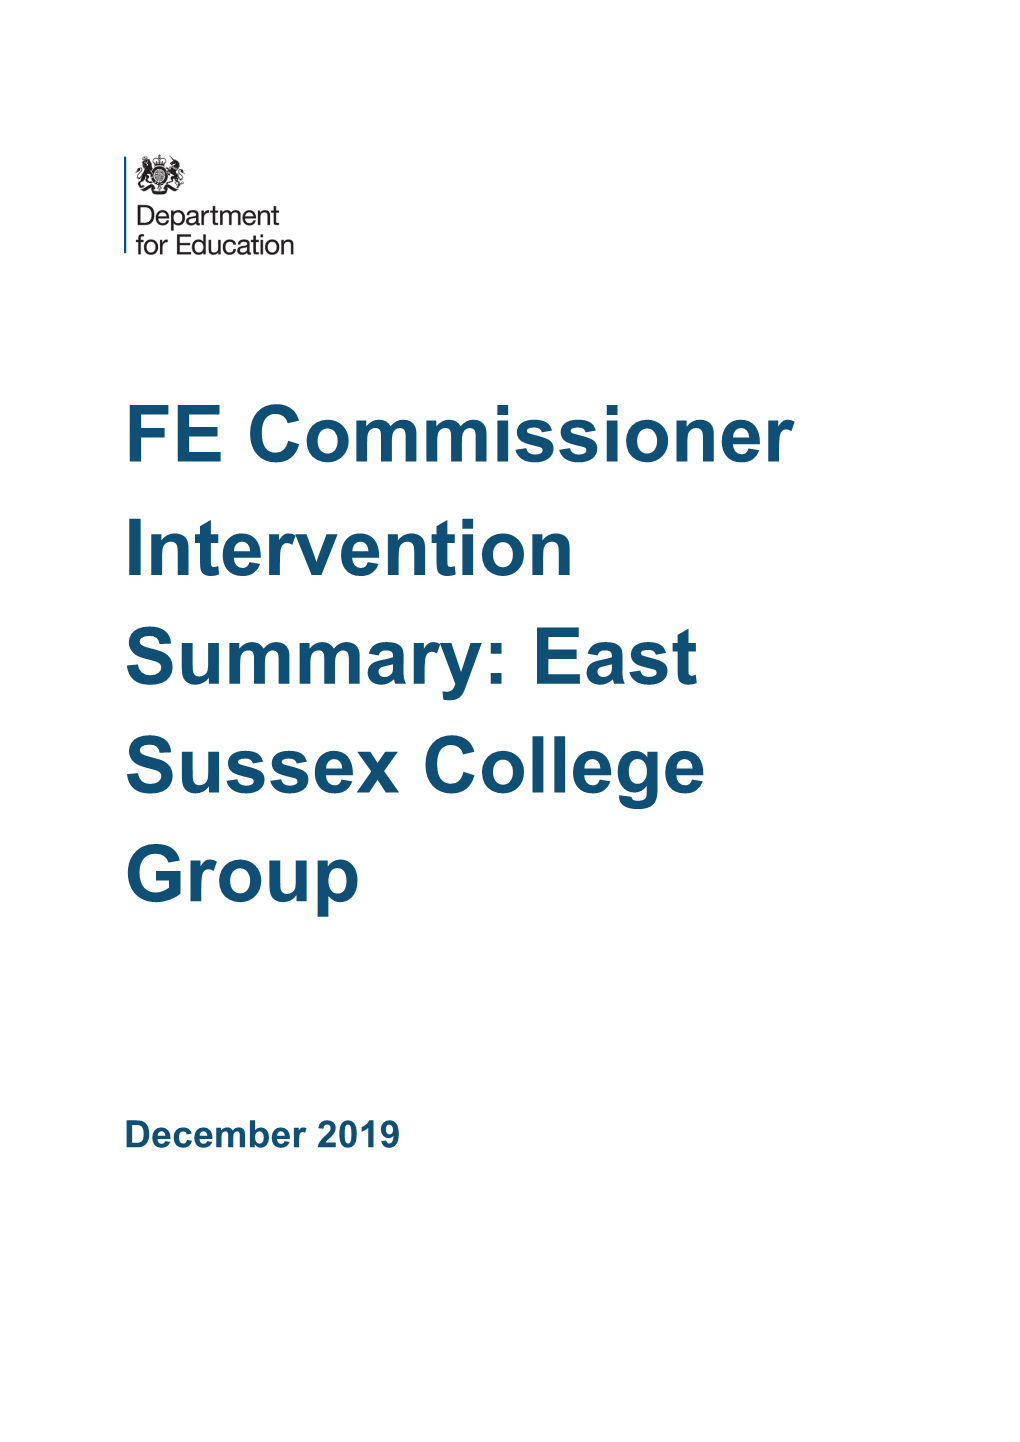 FE Commissioner Intervention: East Sussex College Group